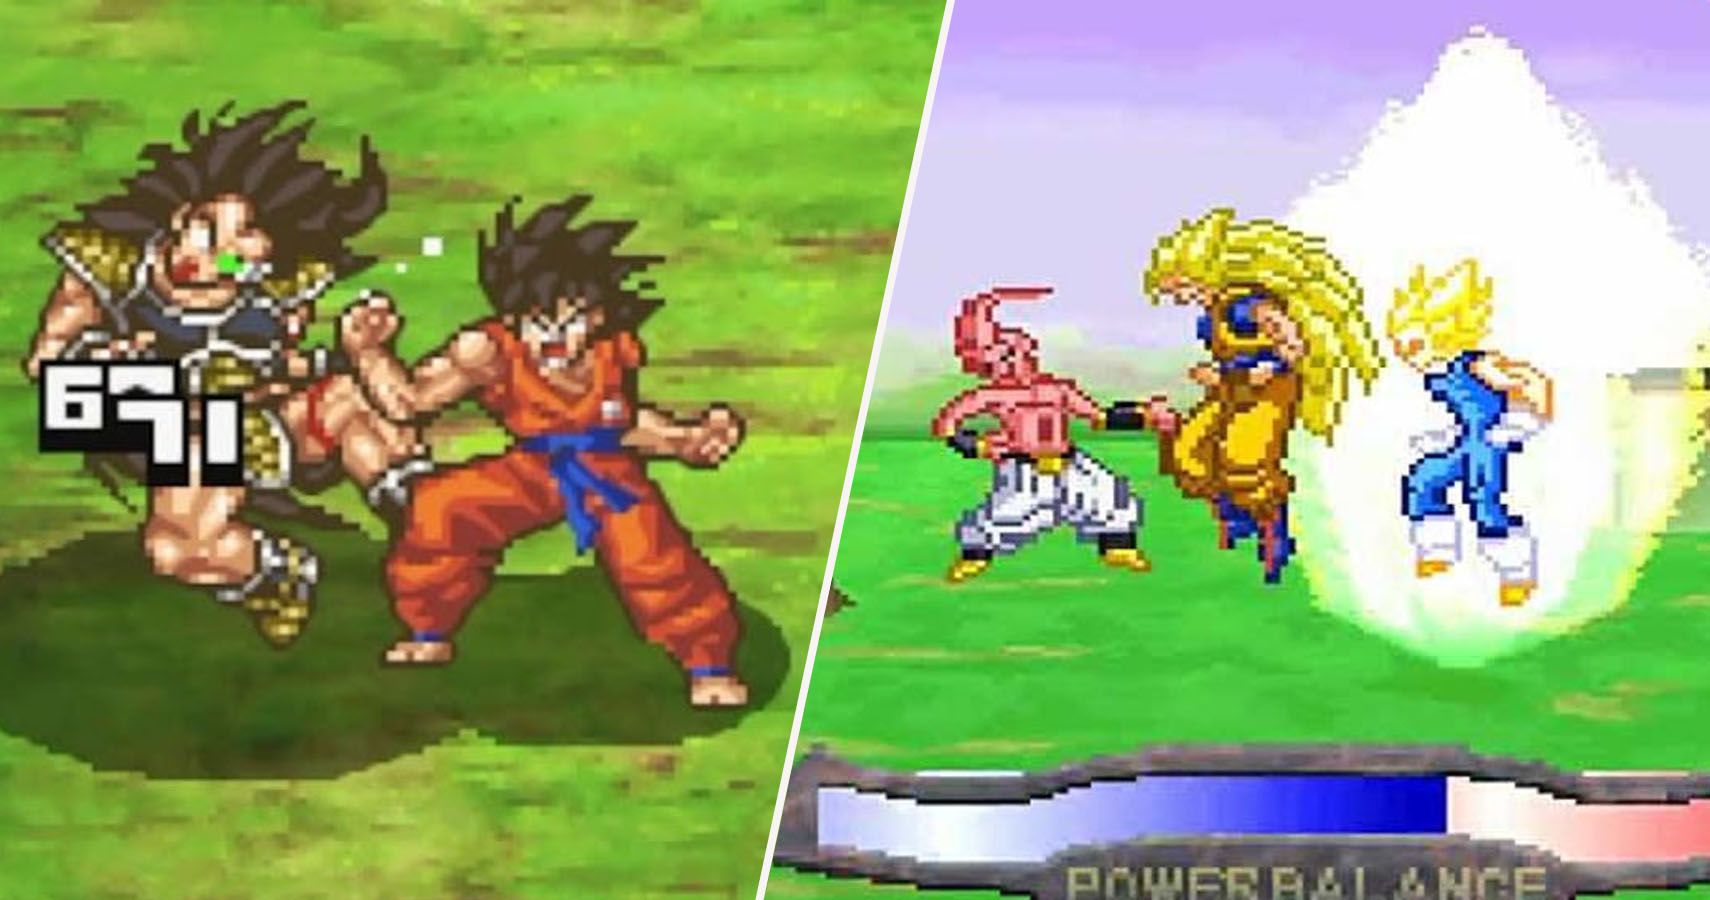 dragon ball z fighting games for pc